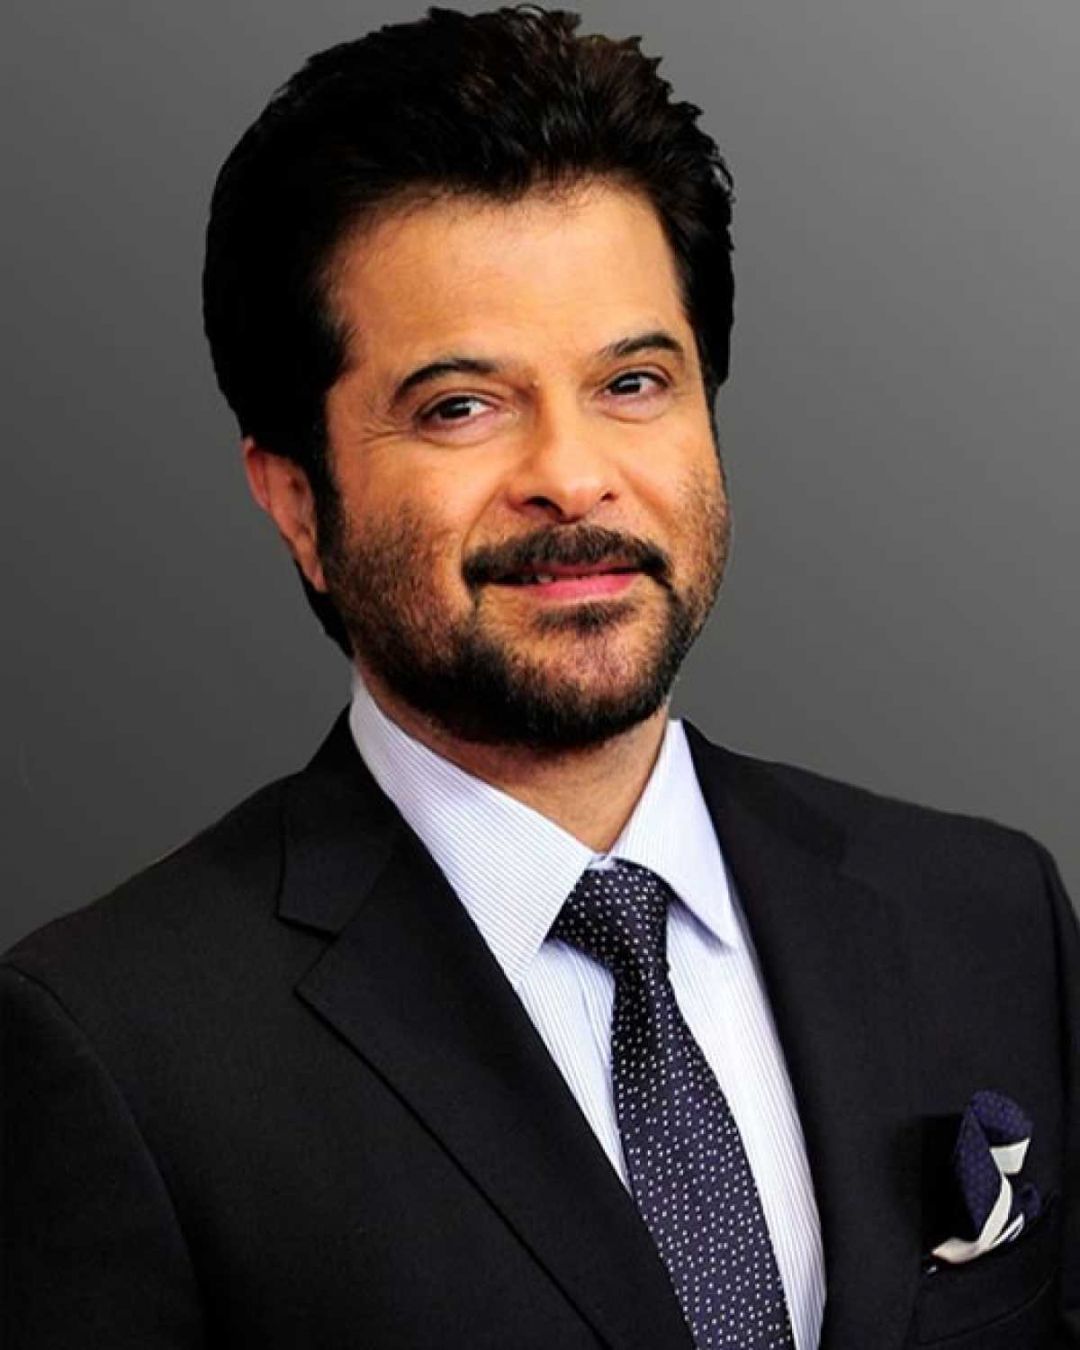 Android, Iphone, Desktop Hd Backgrounds / Wallpapers - Anil Kapoor Indian Actor - HD Wallpaper 